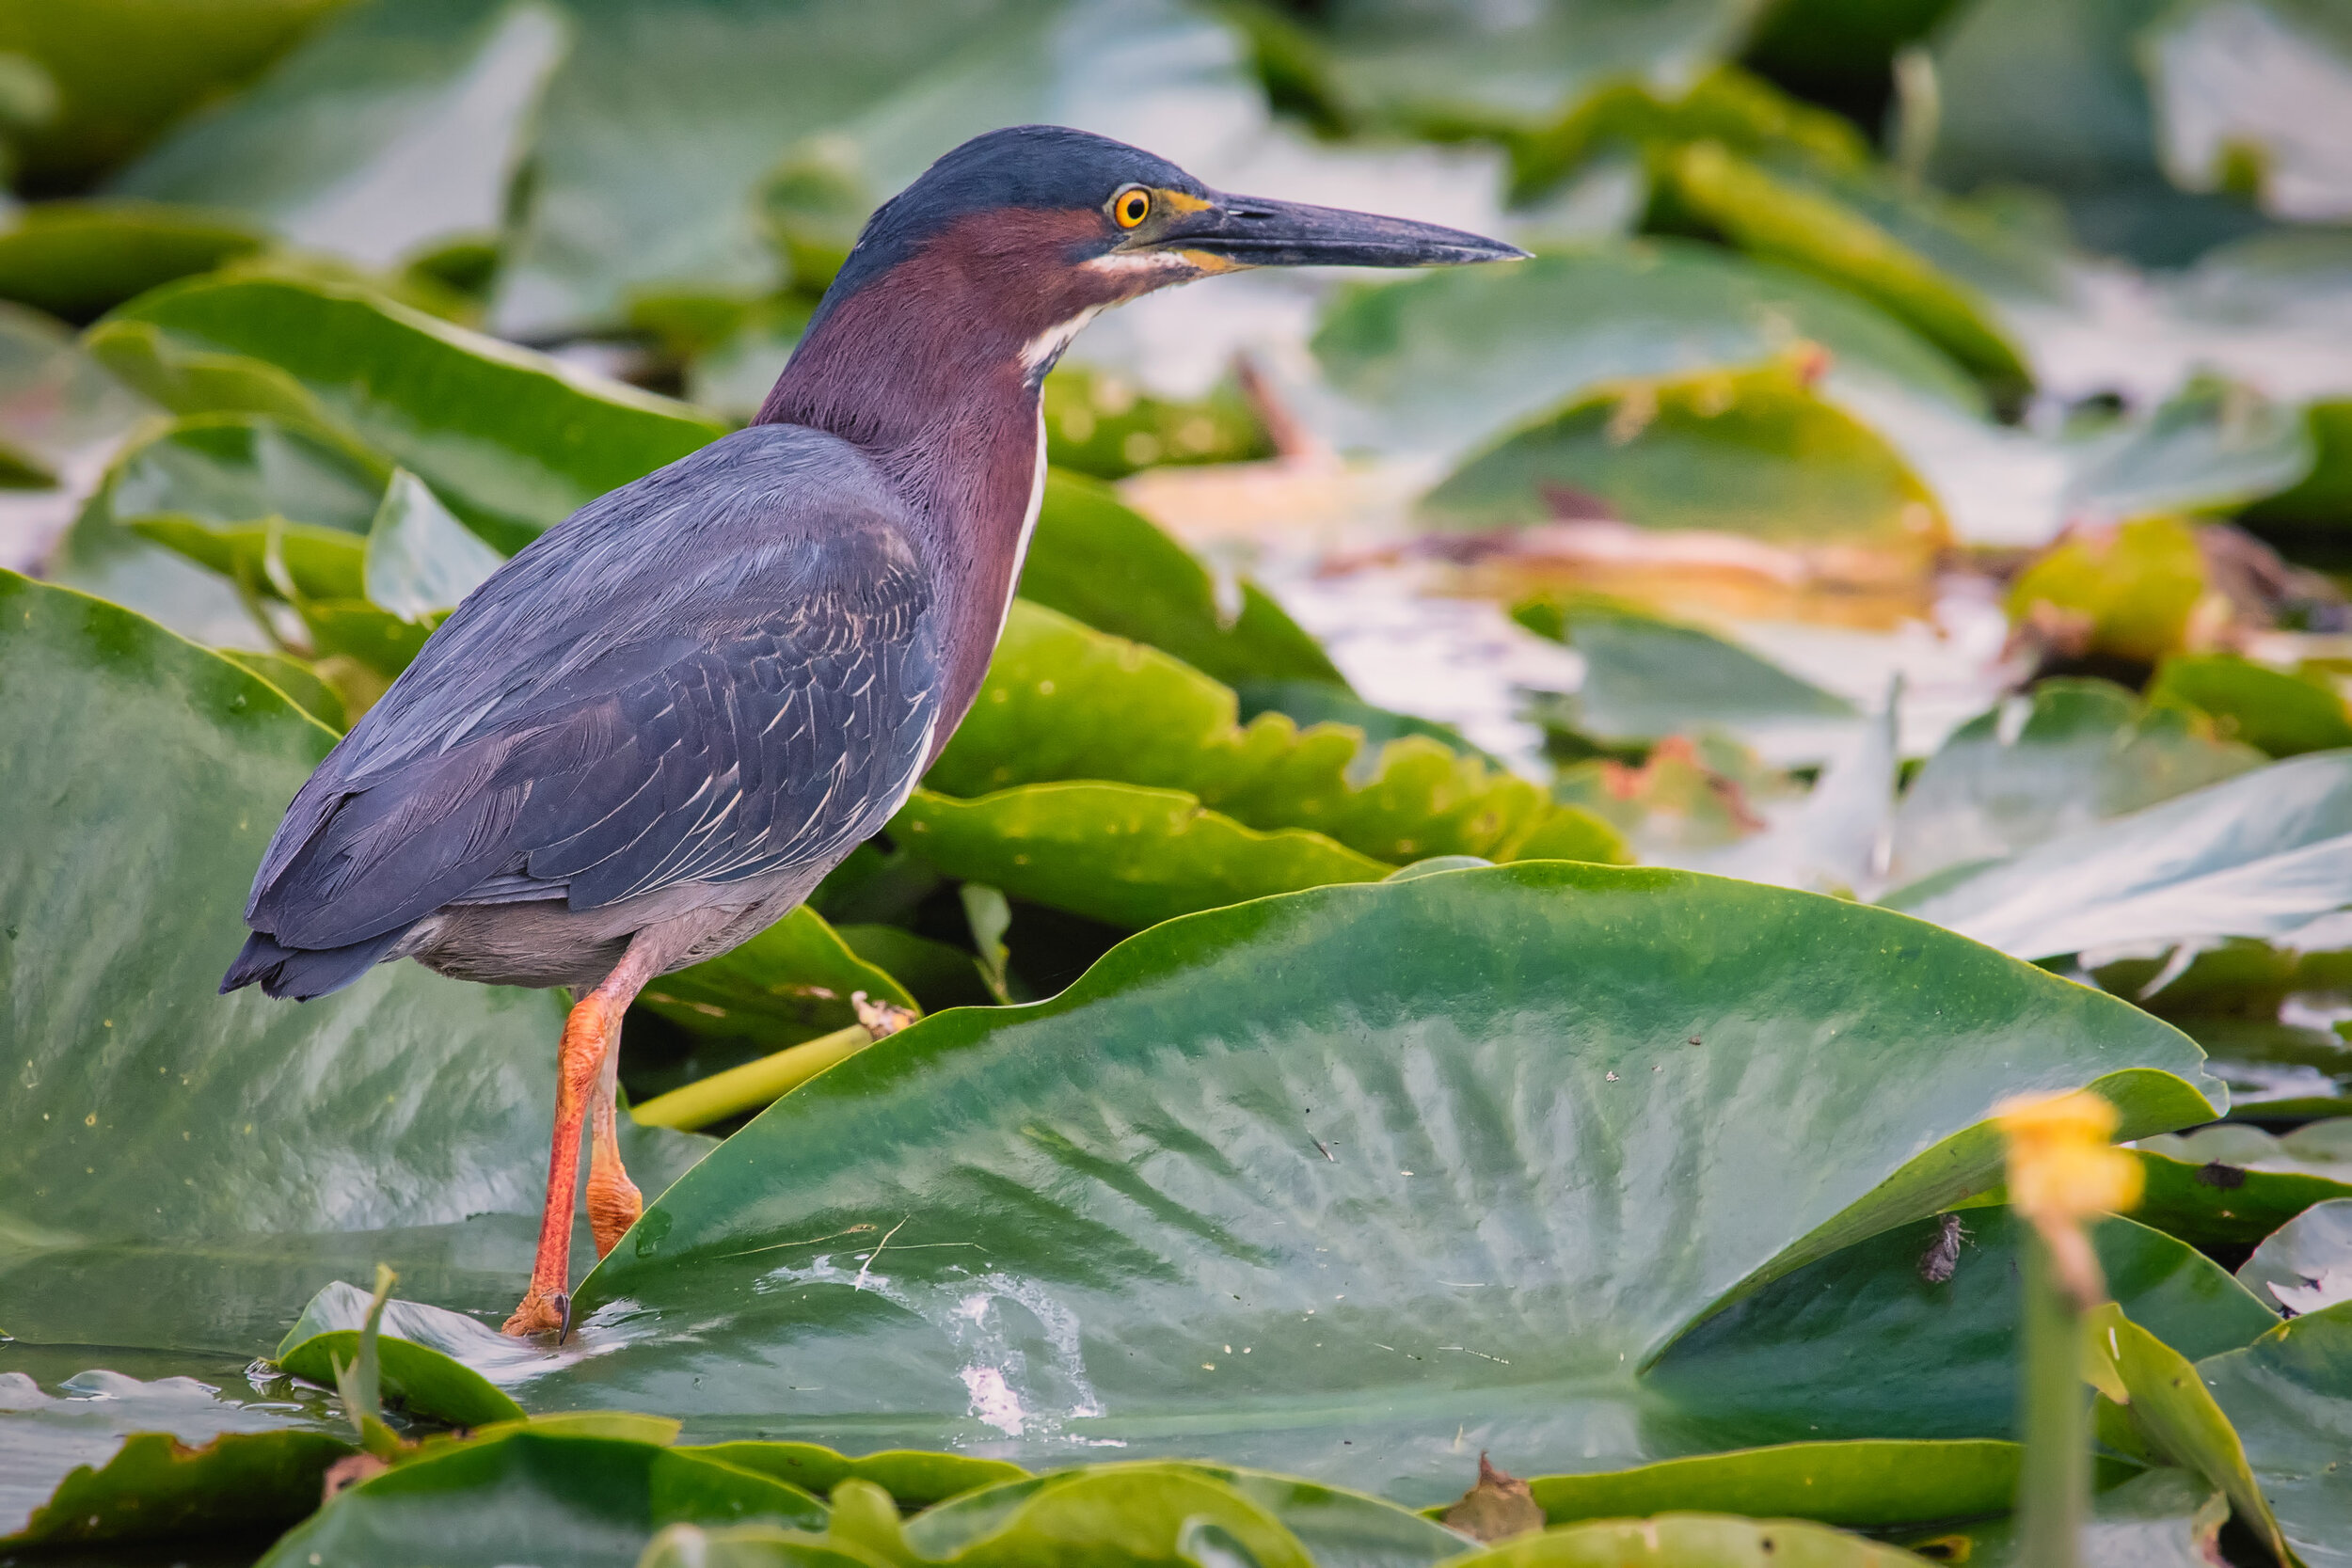 Little Green Heron on Lilly Pads